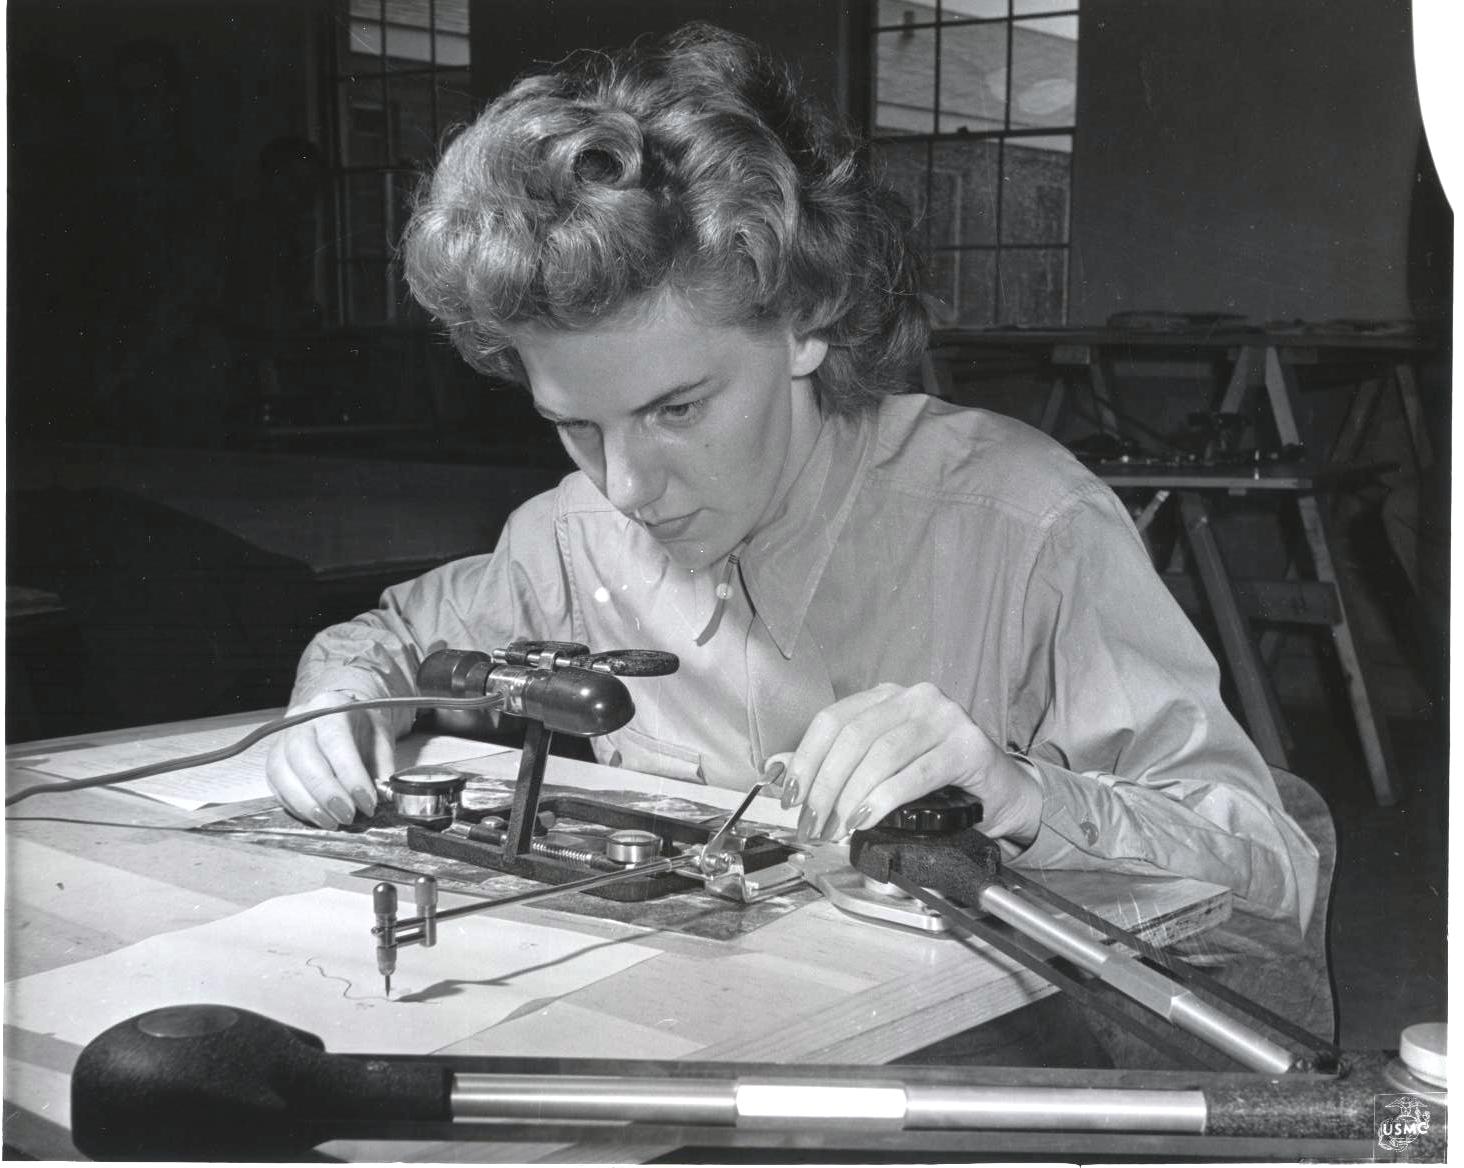 A person is seen on a desk using a contour finder to delineate a map from an photograph.